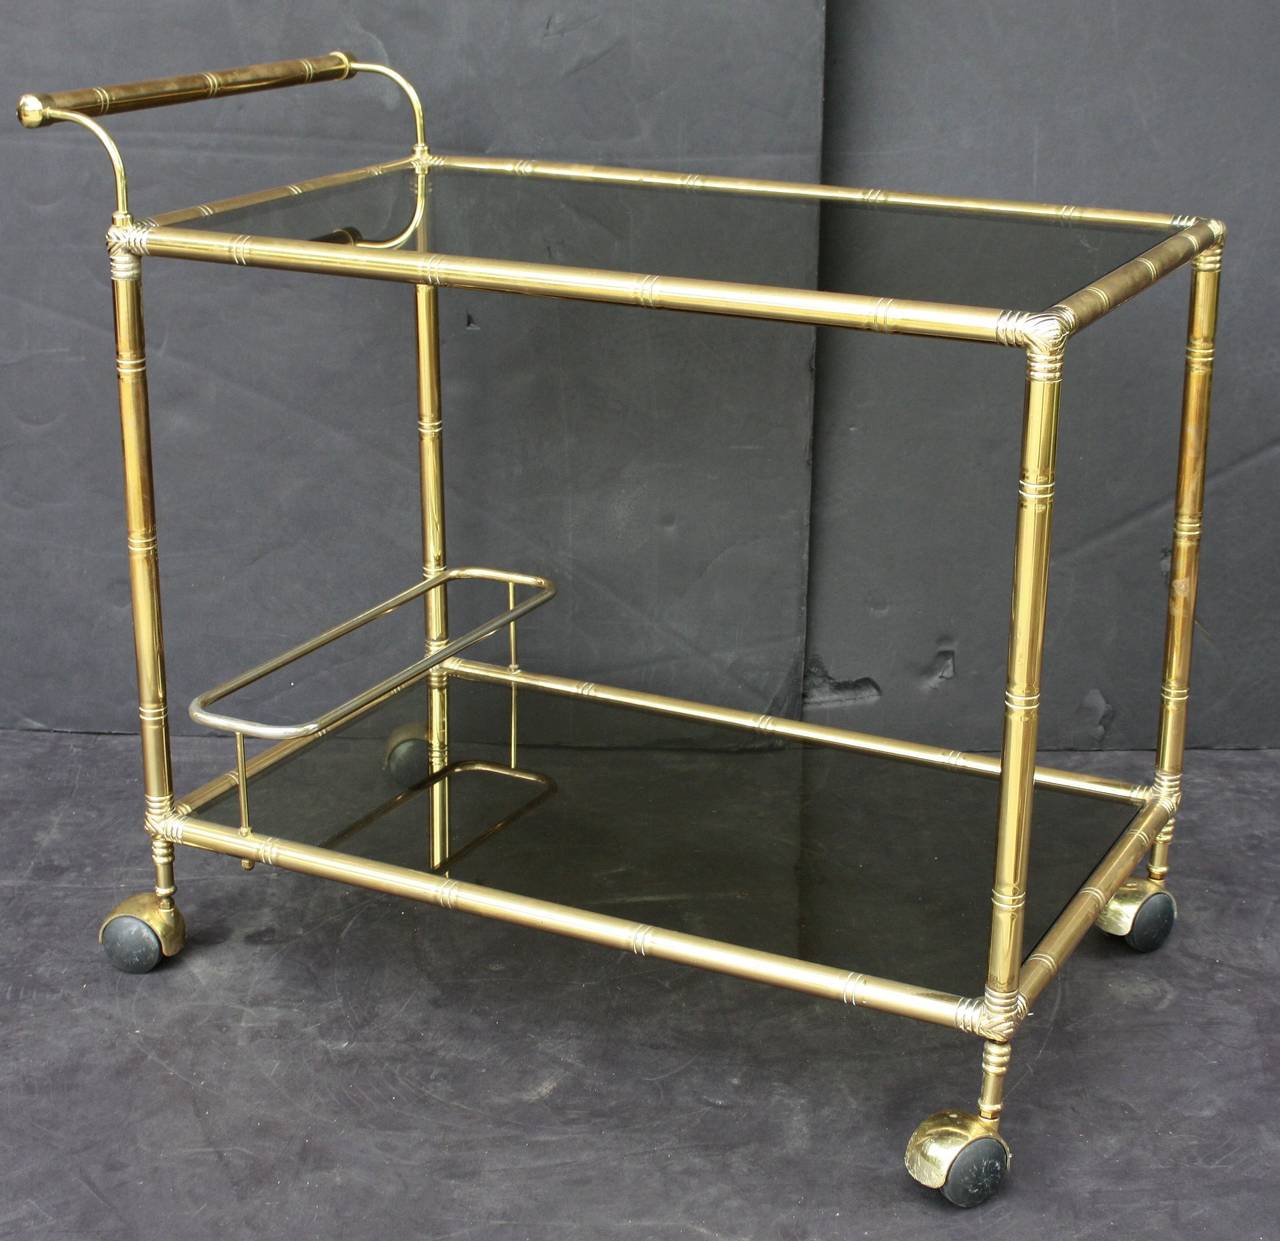 A vintage French rectangular bar cart table or serving trolley in brass with a bamboo design, and featuring two smoked glass tiers, on rolling caster wheels. 

Perfect for use as a side or end table.